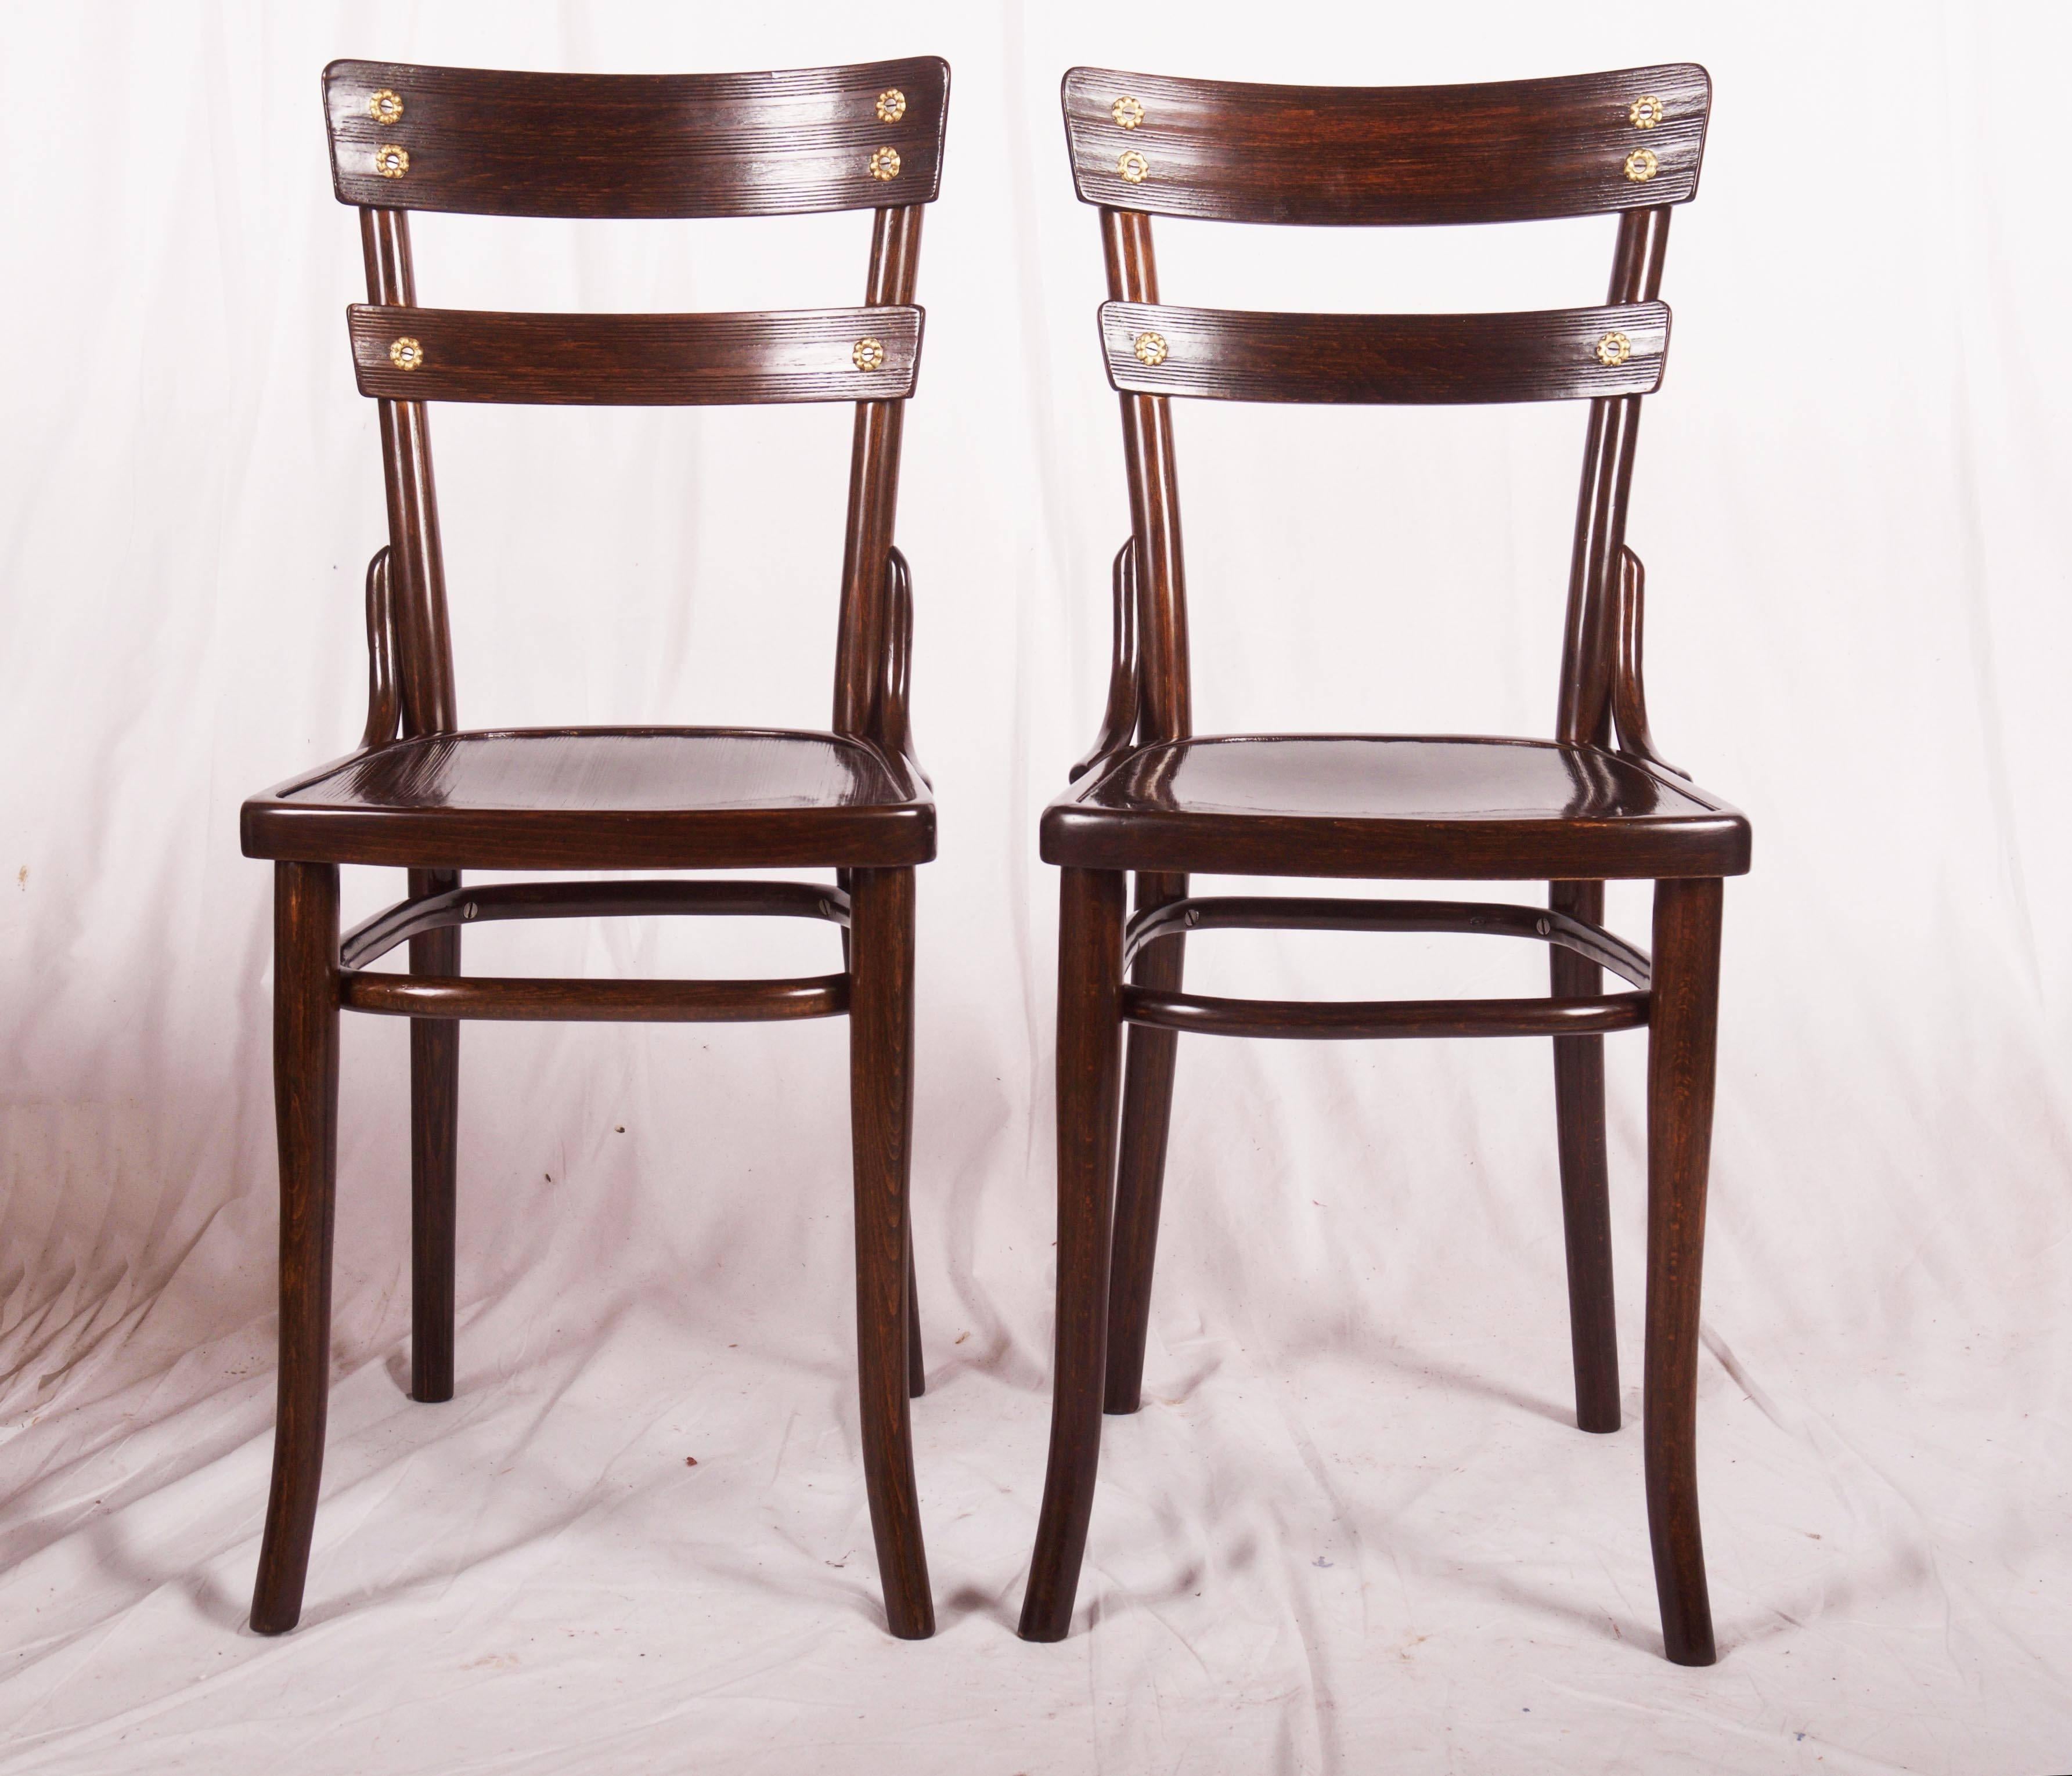 Austrian Thonet Dining Room Chairs For Sale